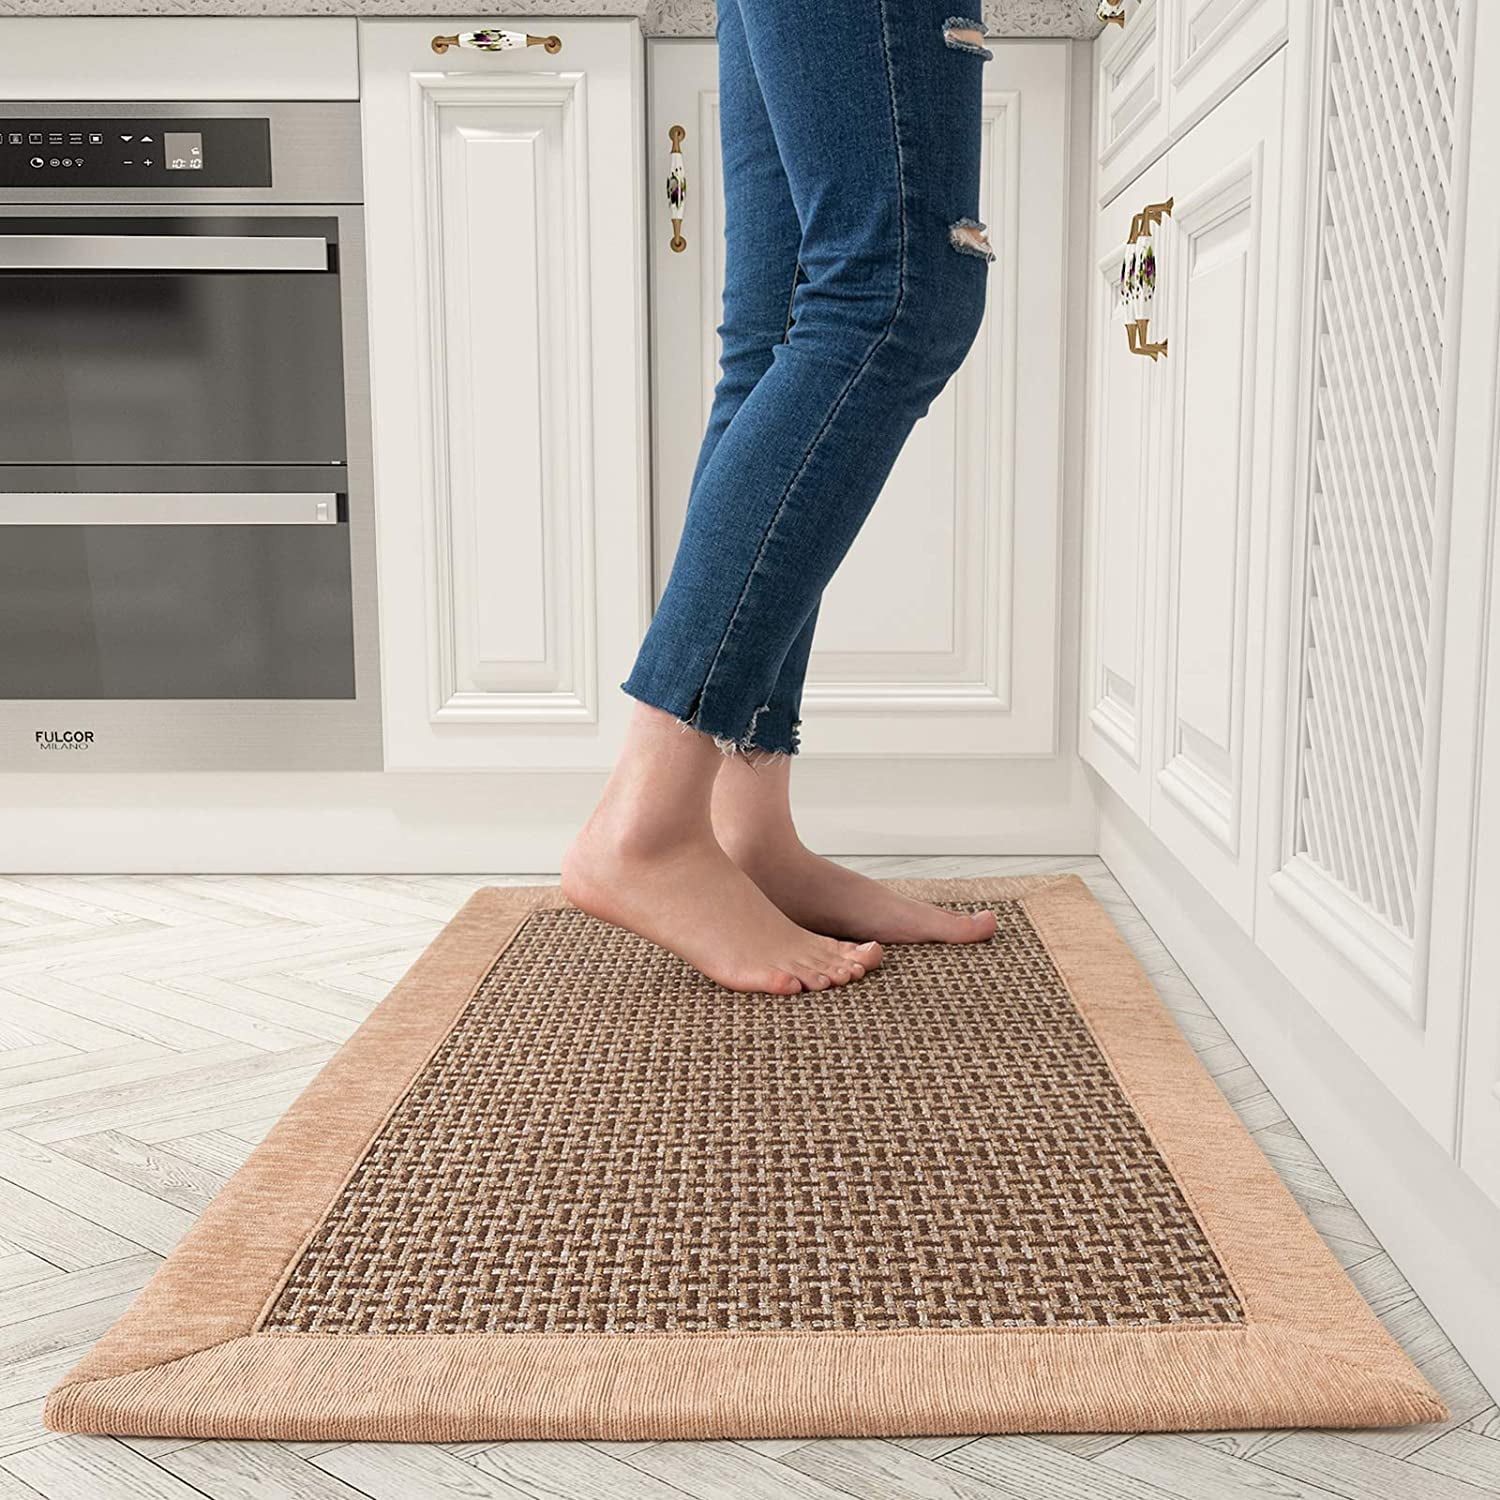 Kitchen Rugs Mat Non Skid D Shaped Decor 18 x 30 Inches 18 x 30 Inches, 2